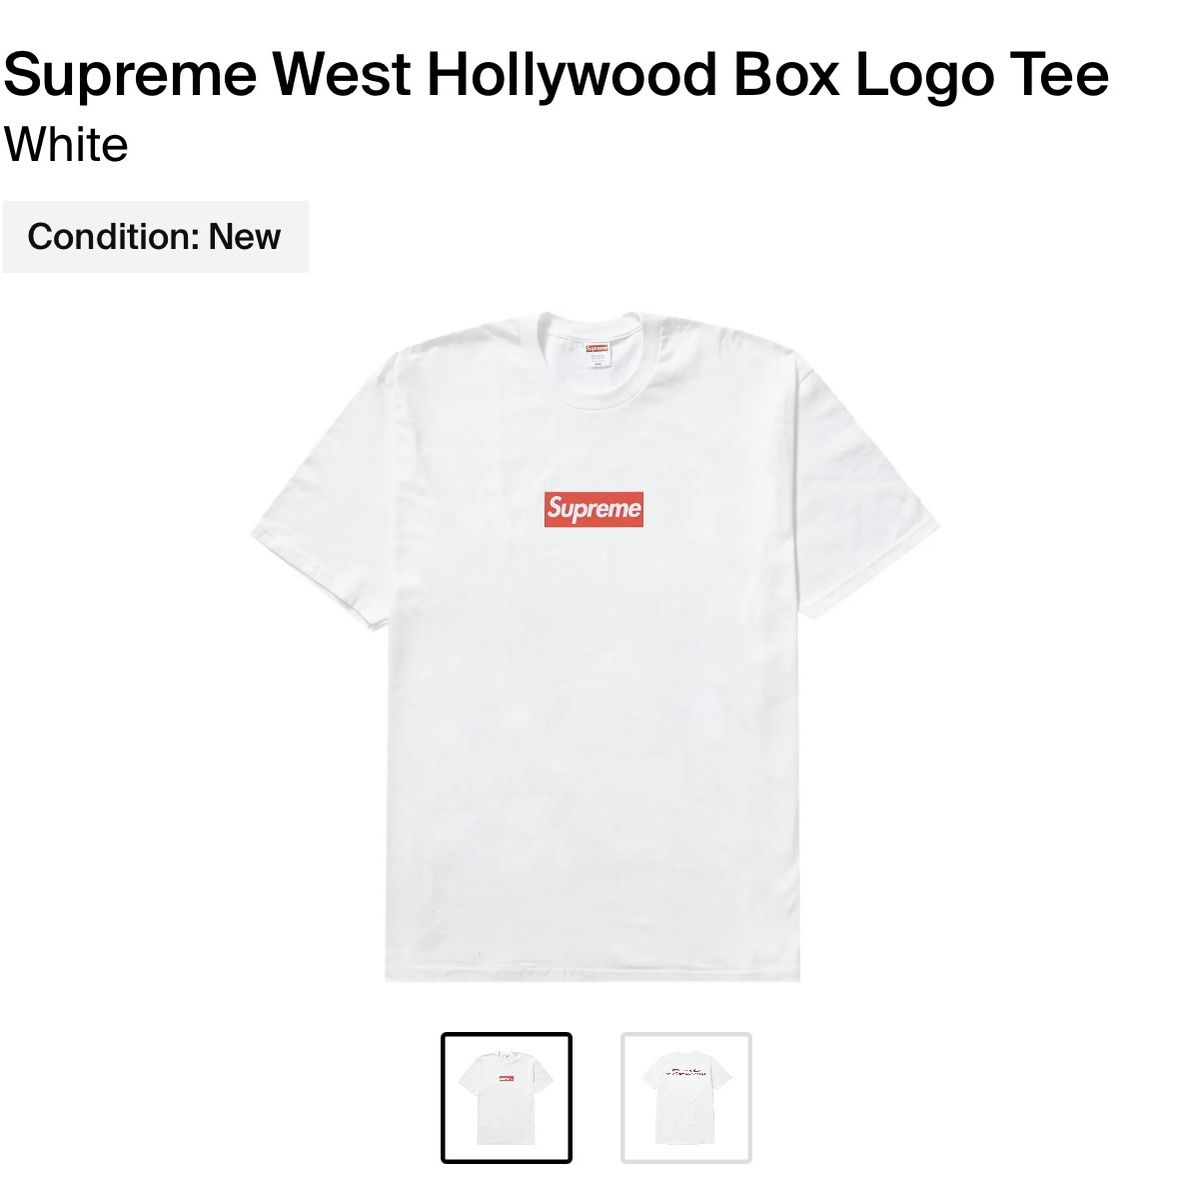 Supreme West Hollywood Box Logo Tee for Sale in Los Angeles, CA 